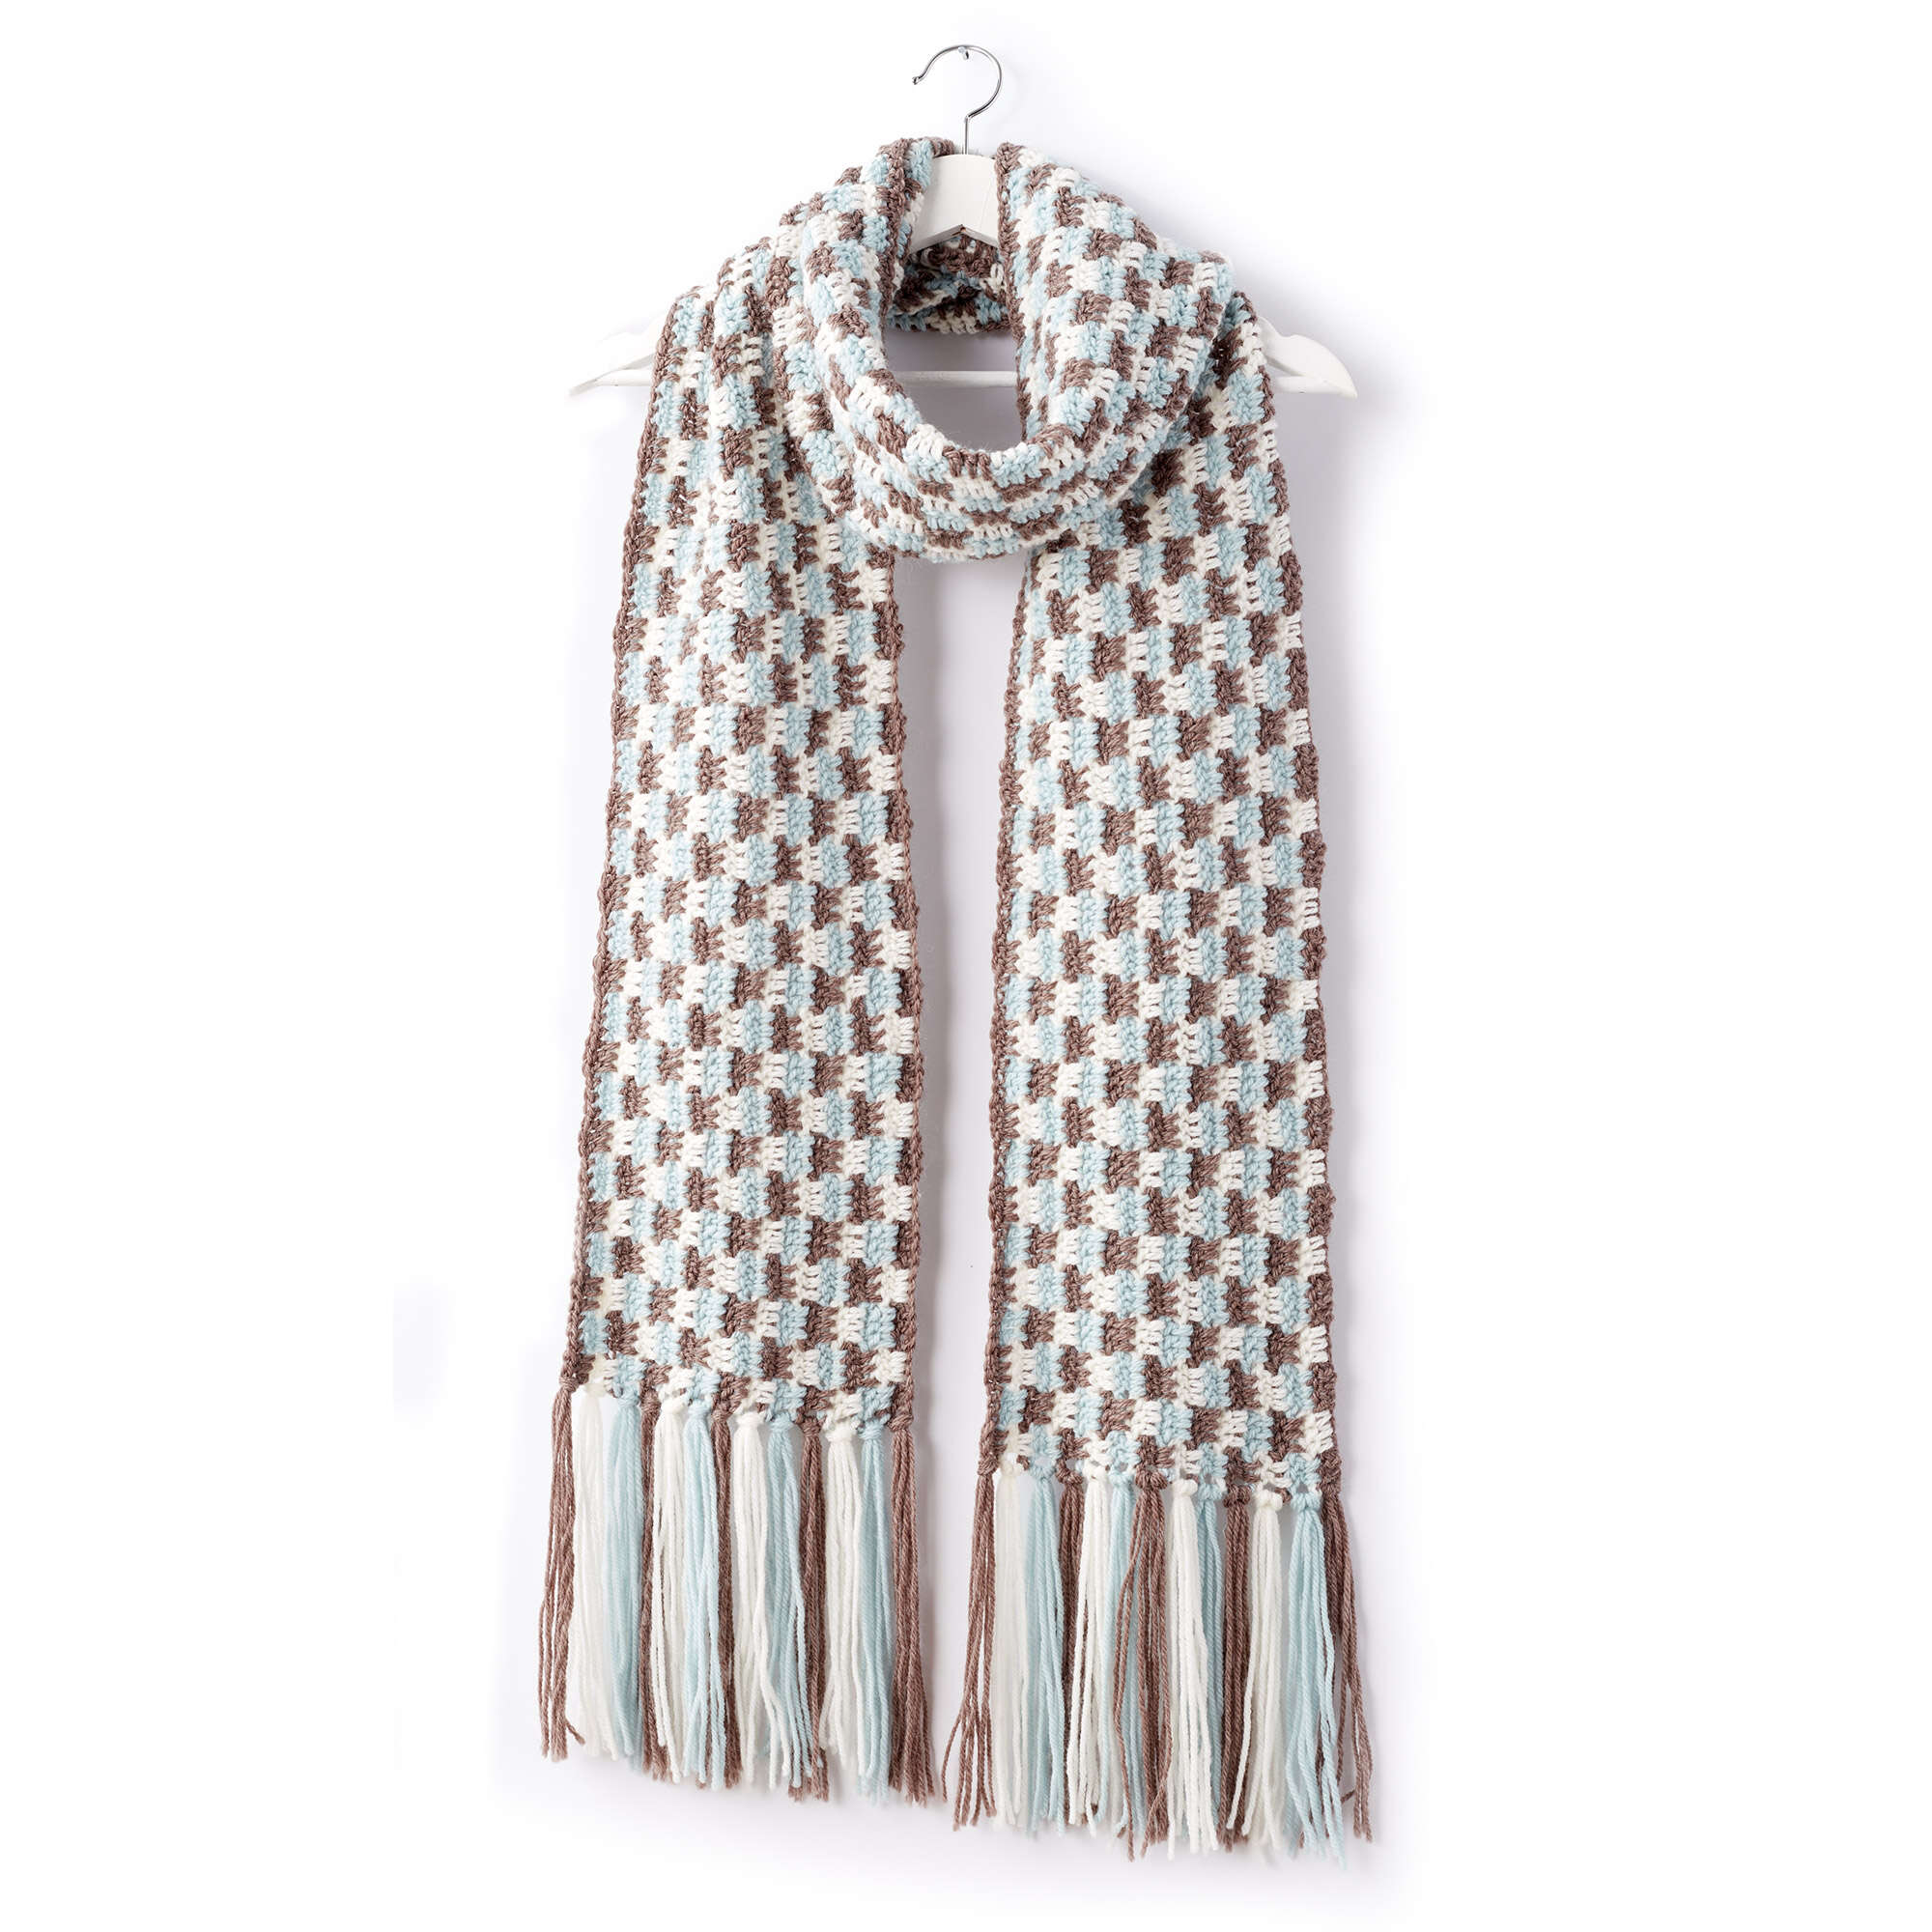 Free Pattern: Check Yourself Crochet Scarf in Patons Classic wool Worsted yarn